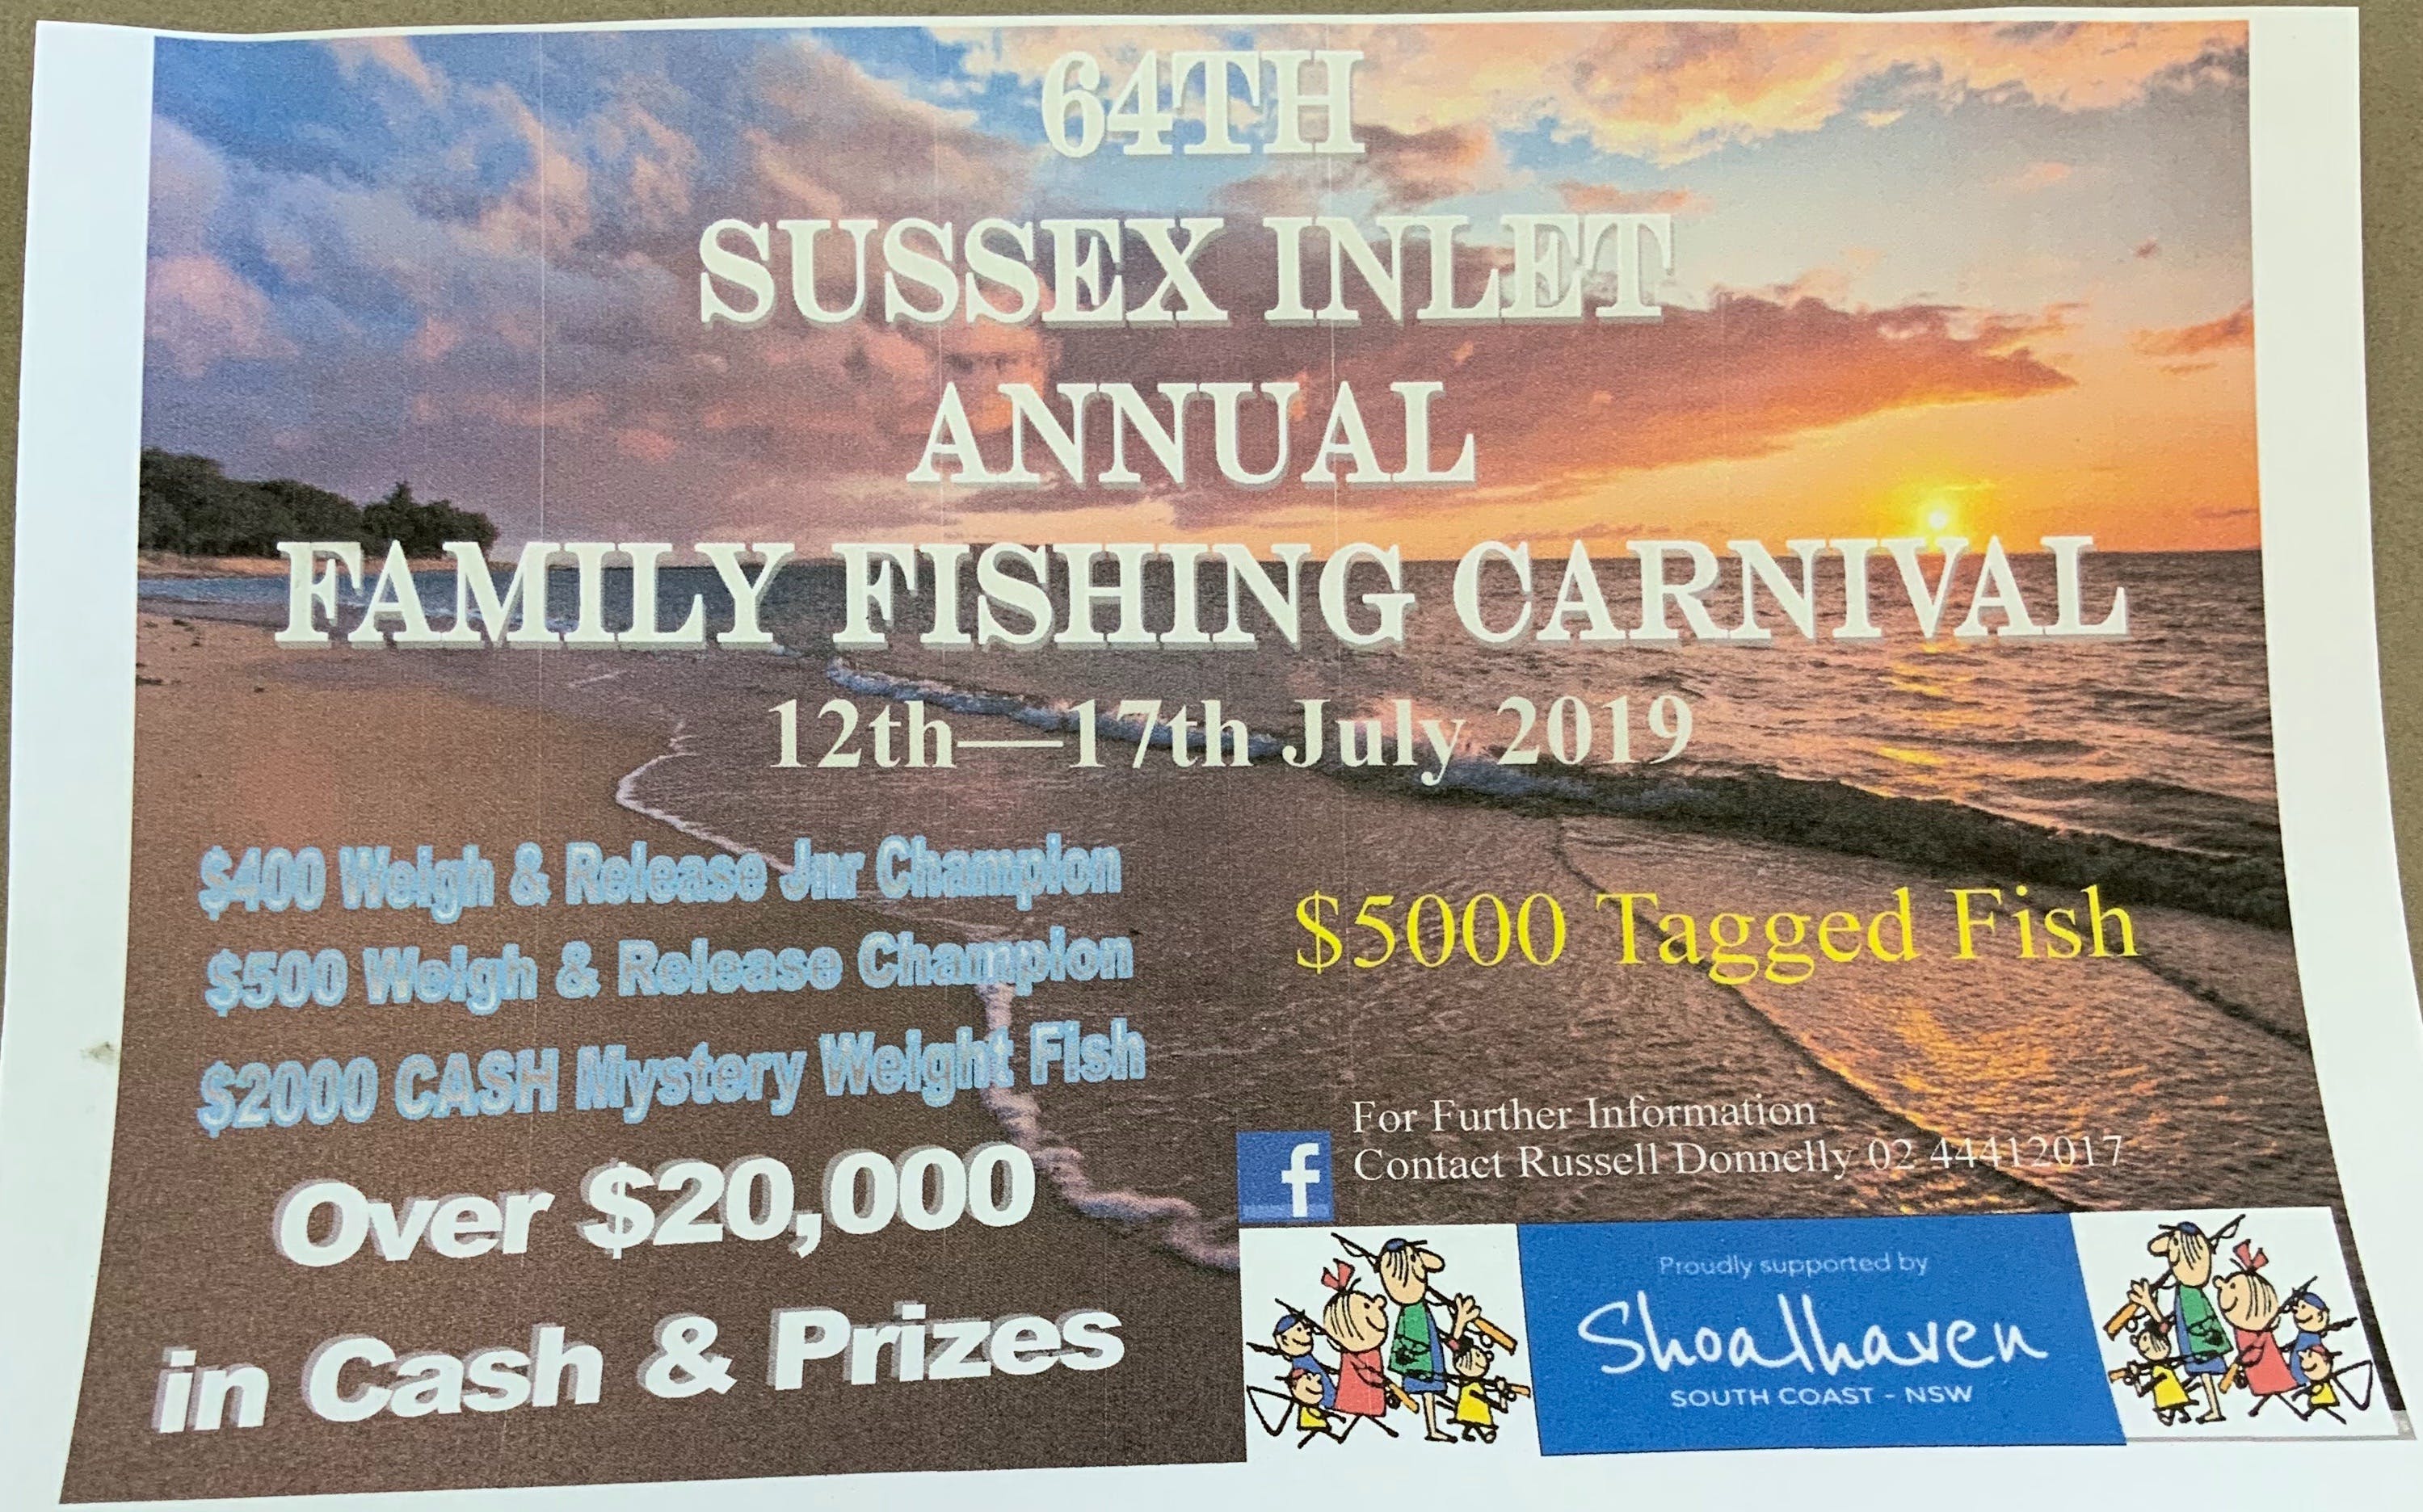 The Sussex Inlet Annual Family Fishing Carnival - Nambucca Heads Accommodation